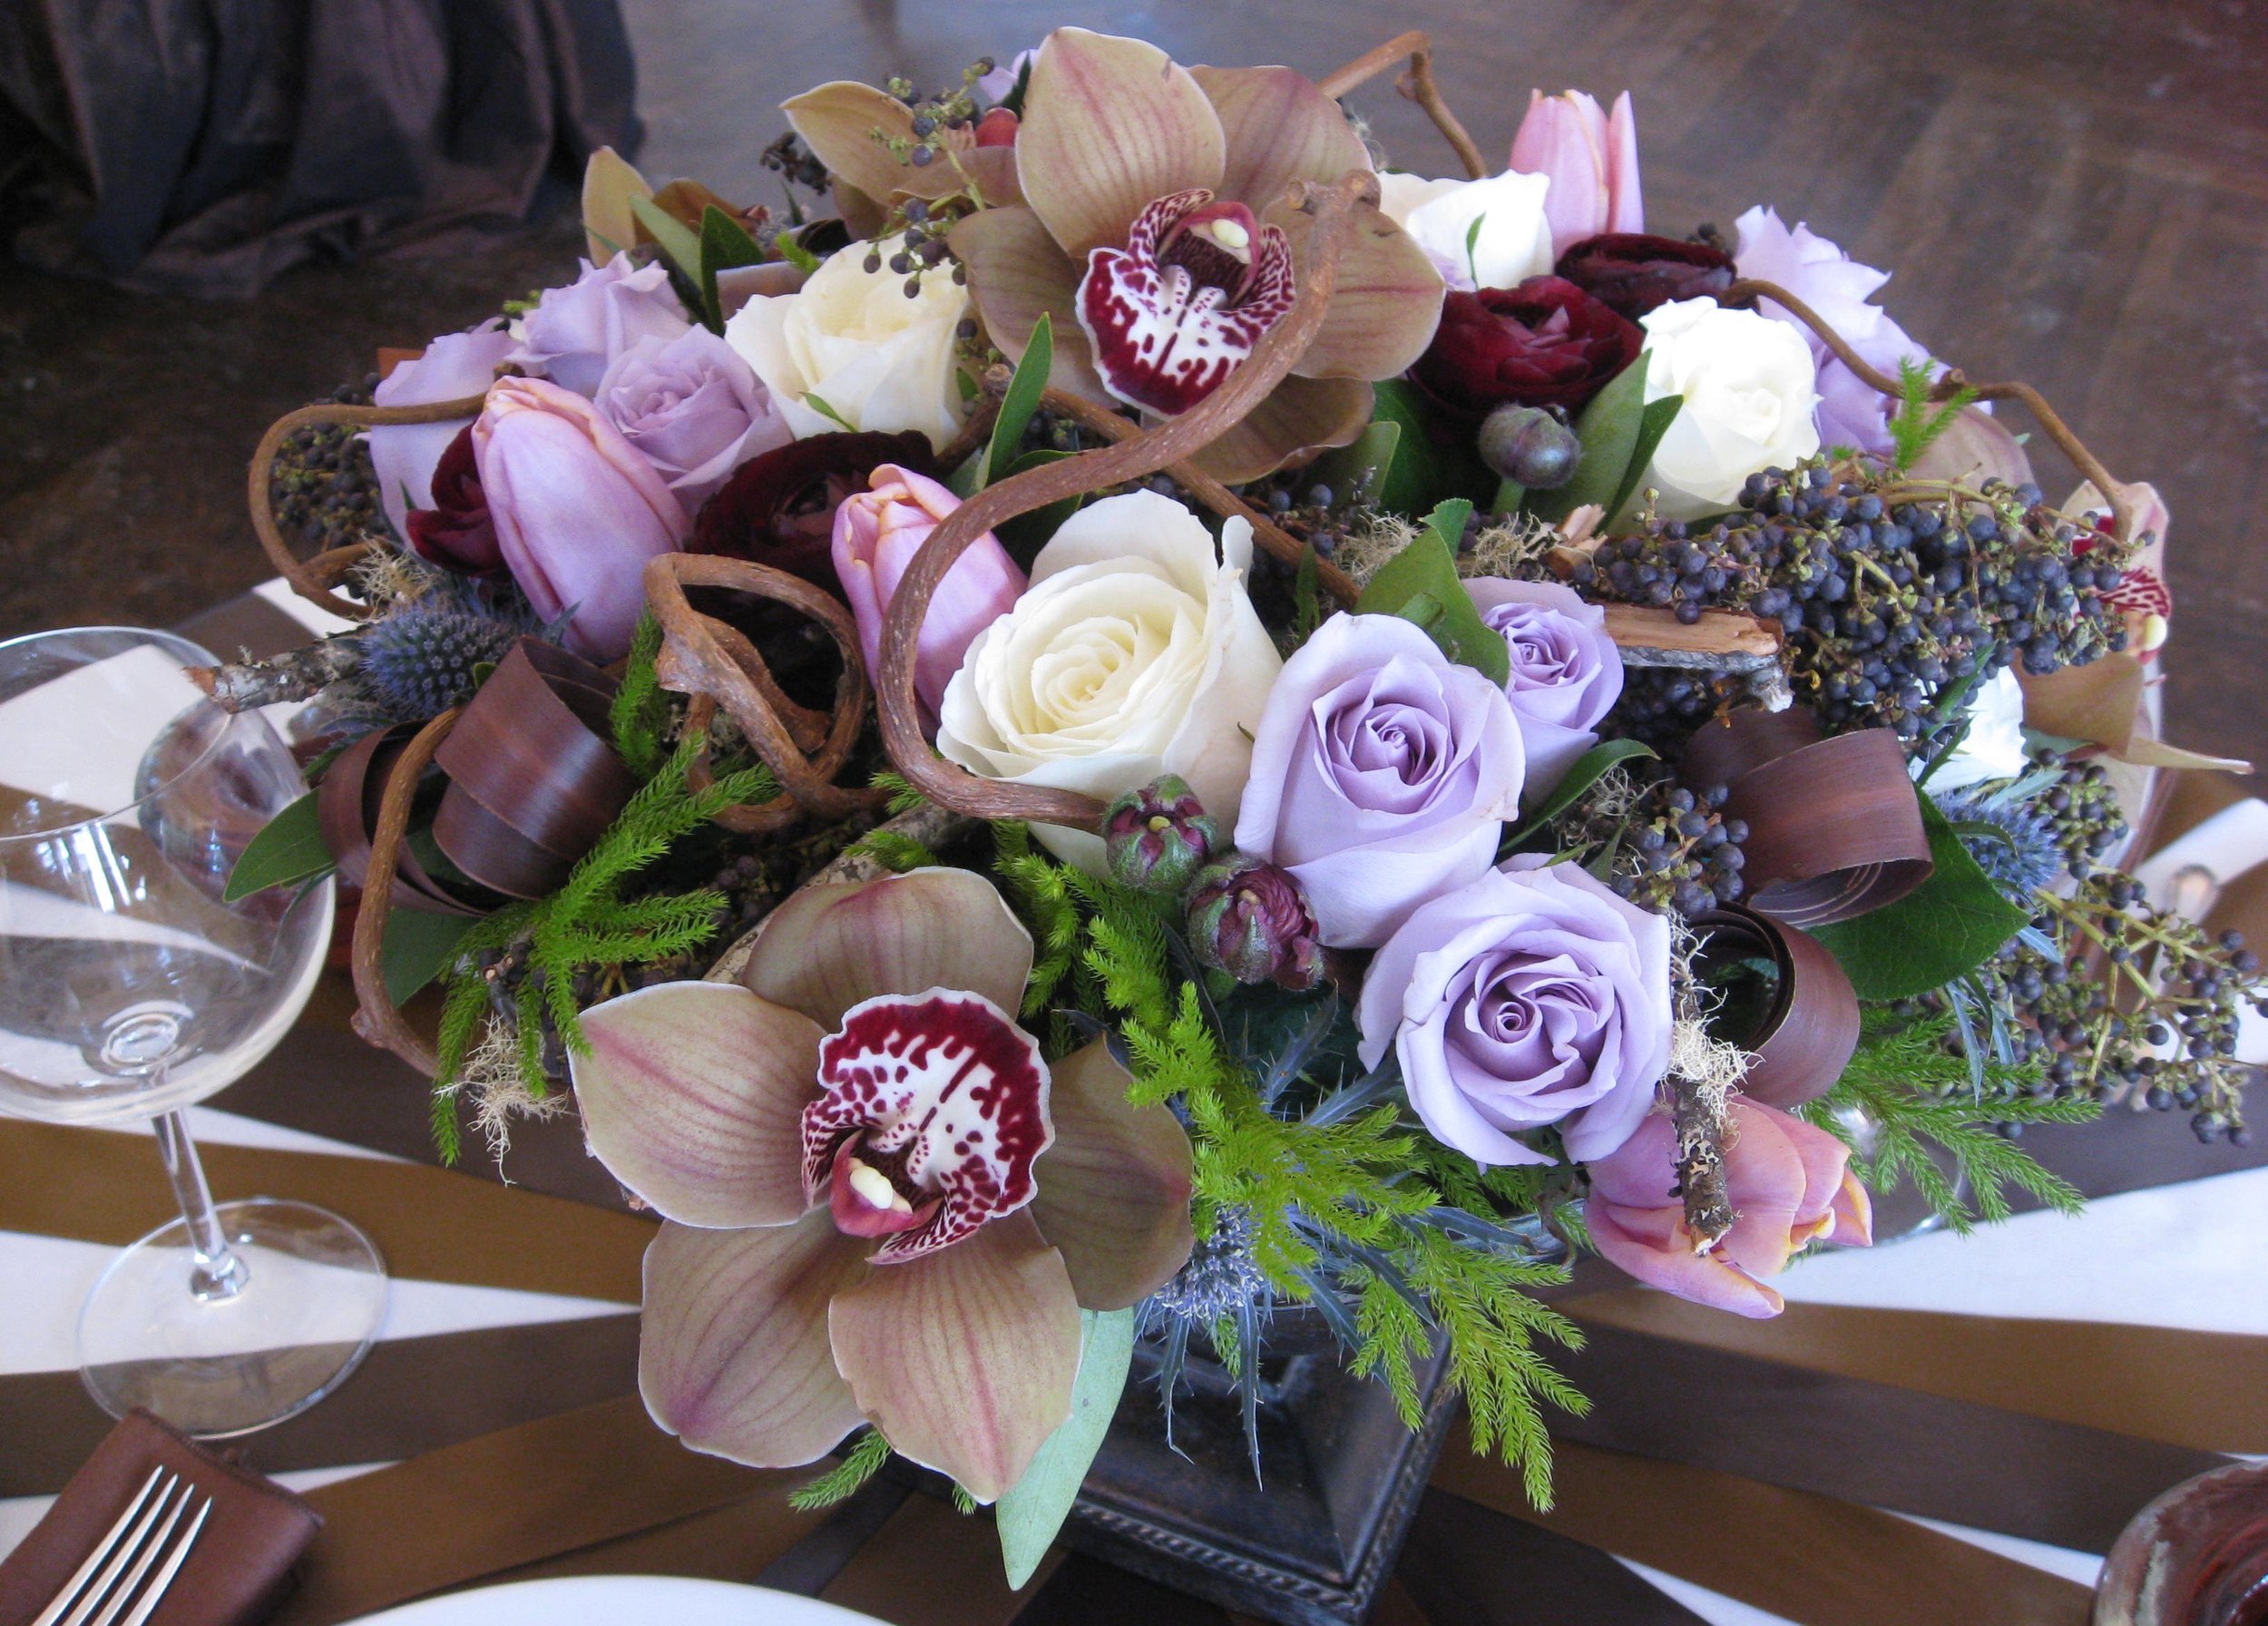 Orchid and Rose Centerpiece designed by Christopher Grigas